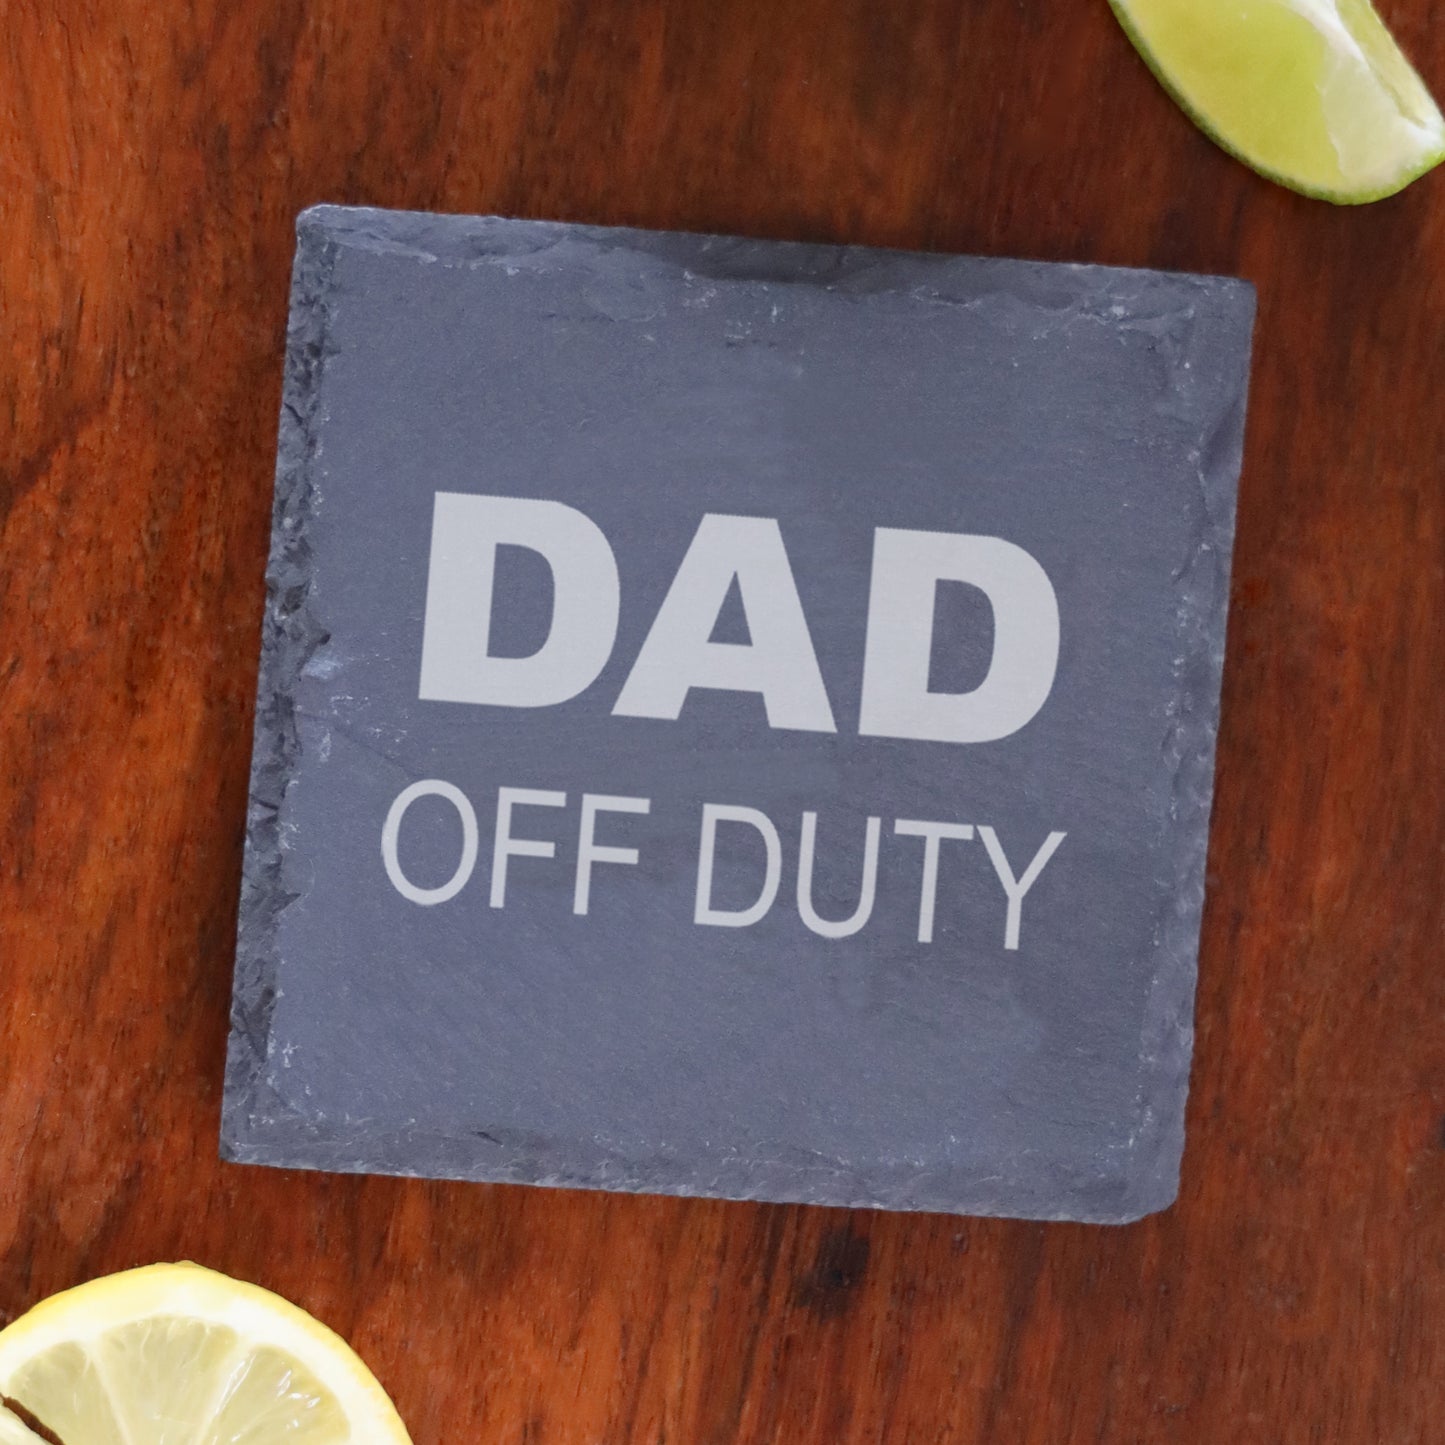 Engraved "Dad Off Duty" Novelty Wine Glass and/or Coaster Set  - Always Looking Good - Square Coaster Only  